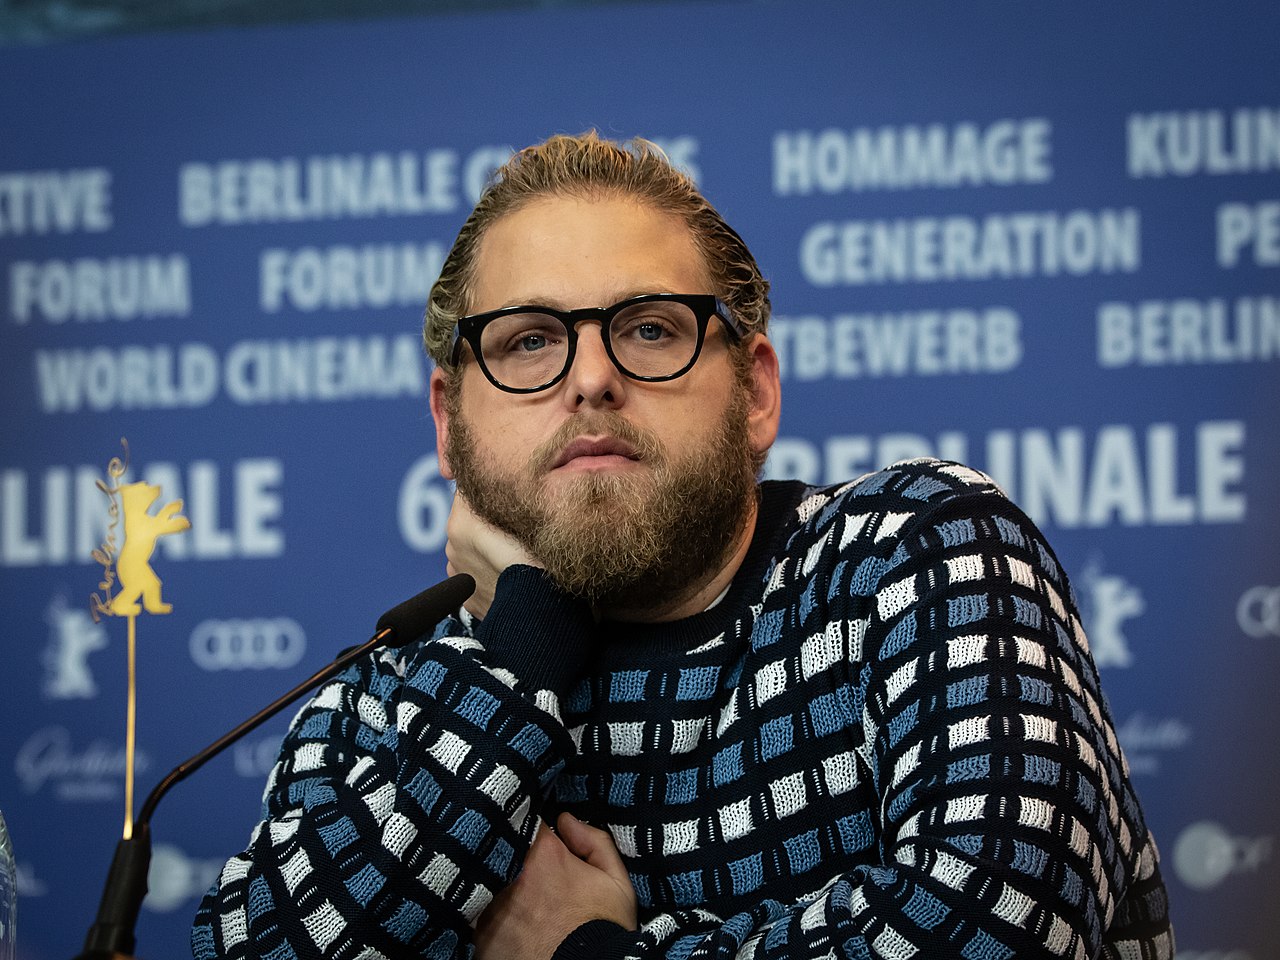 Jonah Hill’s ex-girlfriend stands out in the controversy.